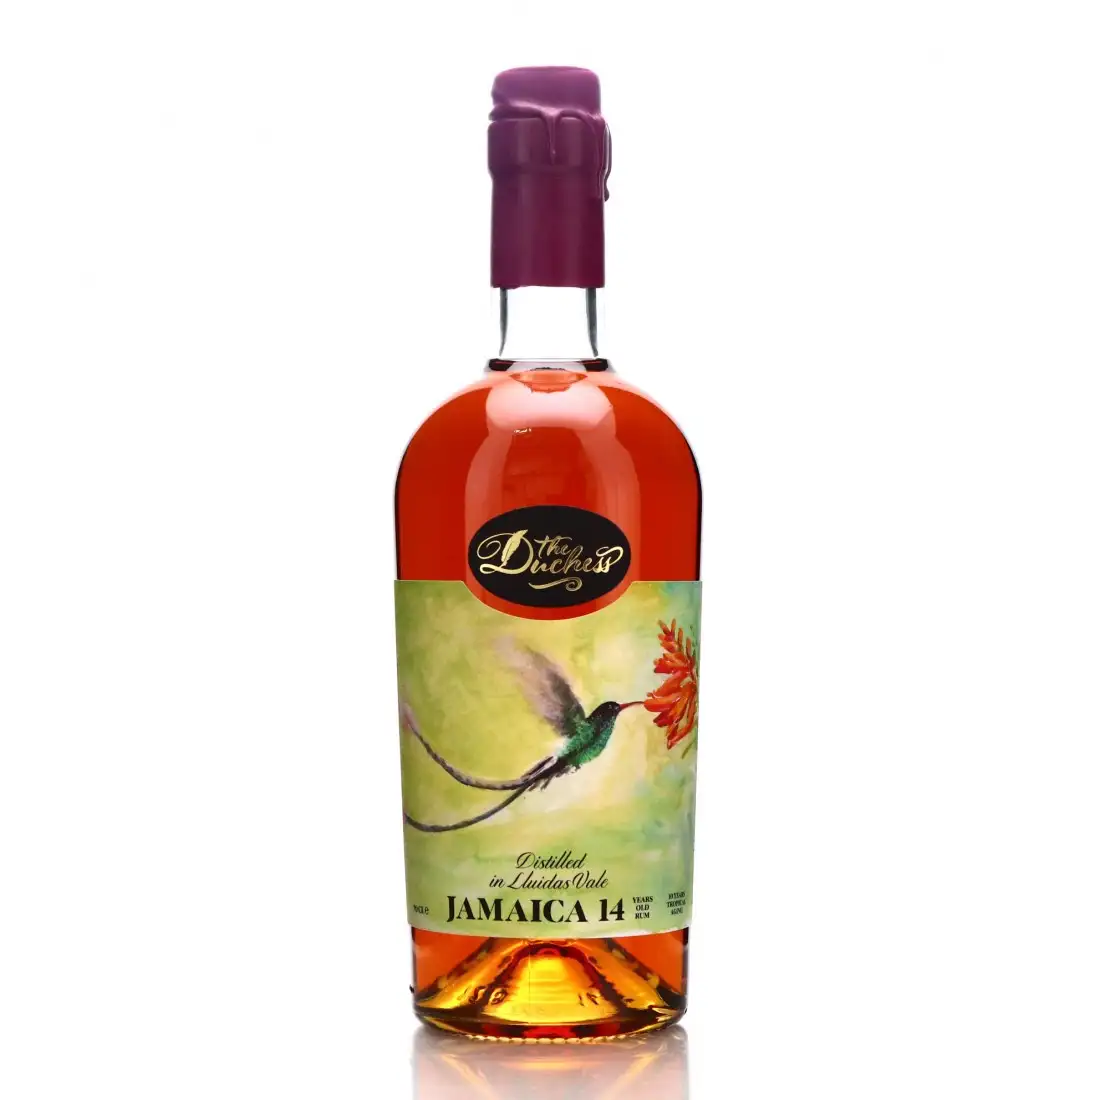 Image of the front of the bottle of the rum Jamaica 14